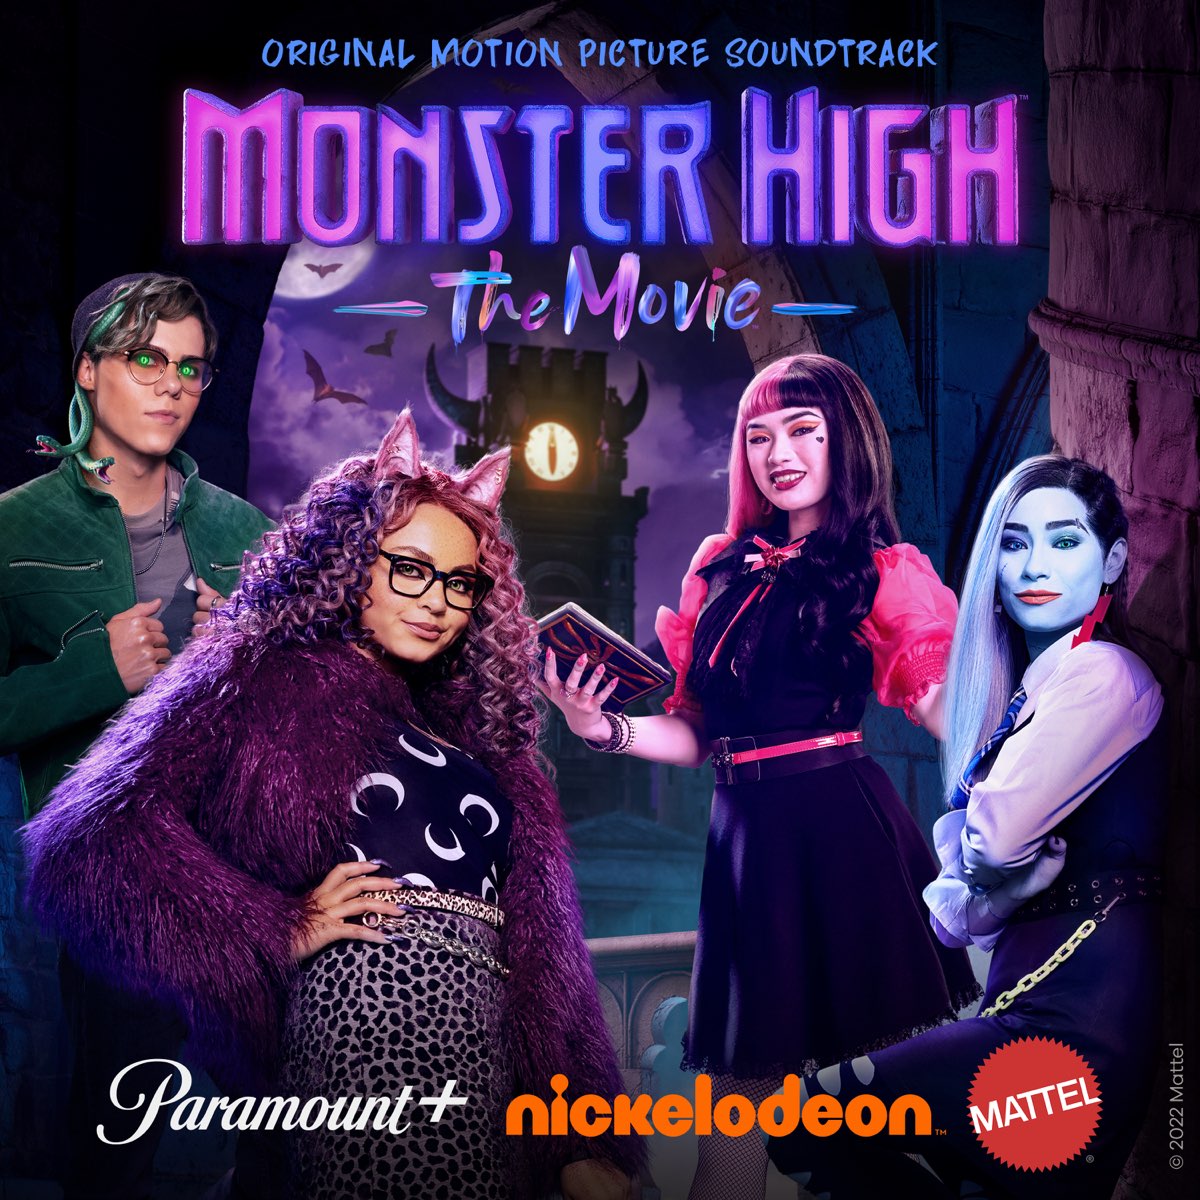 ‎Monster High the Movie (Original Film Soundtrack) by Monster High on